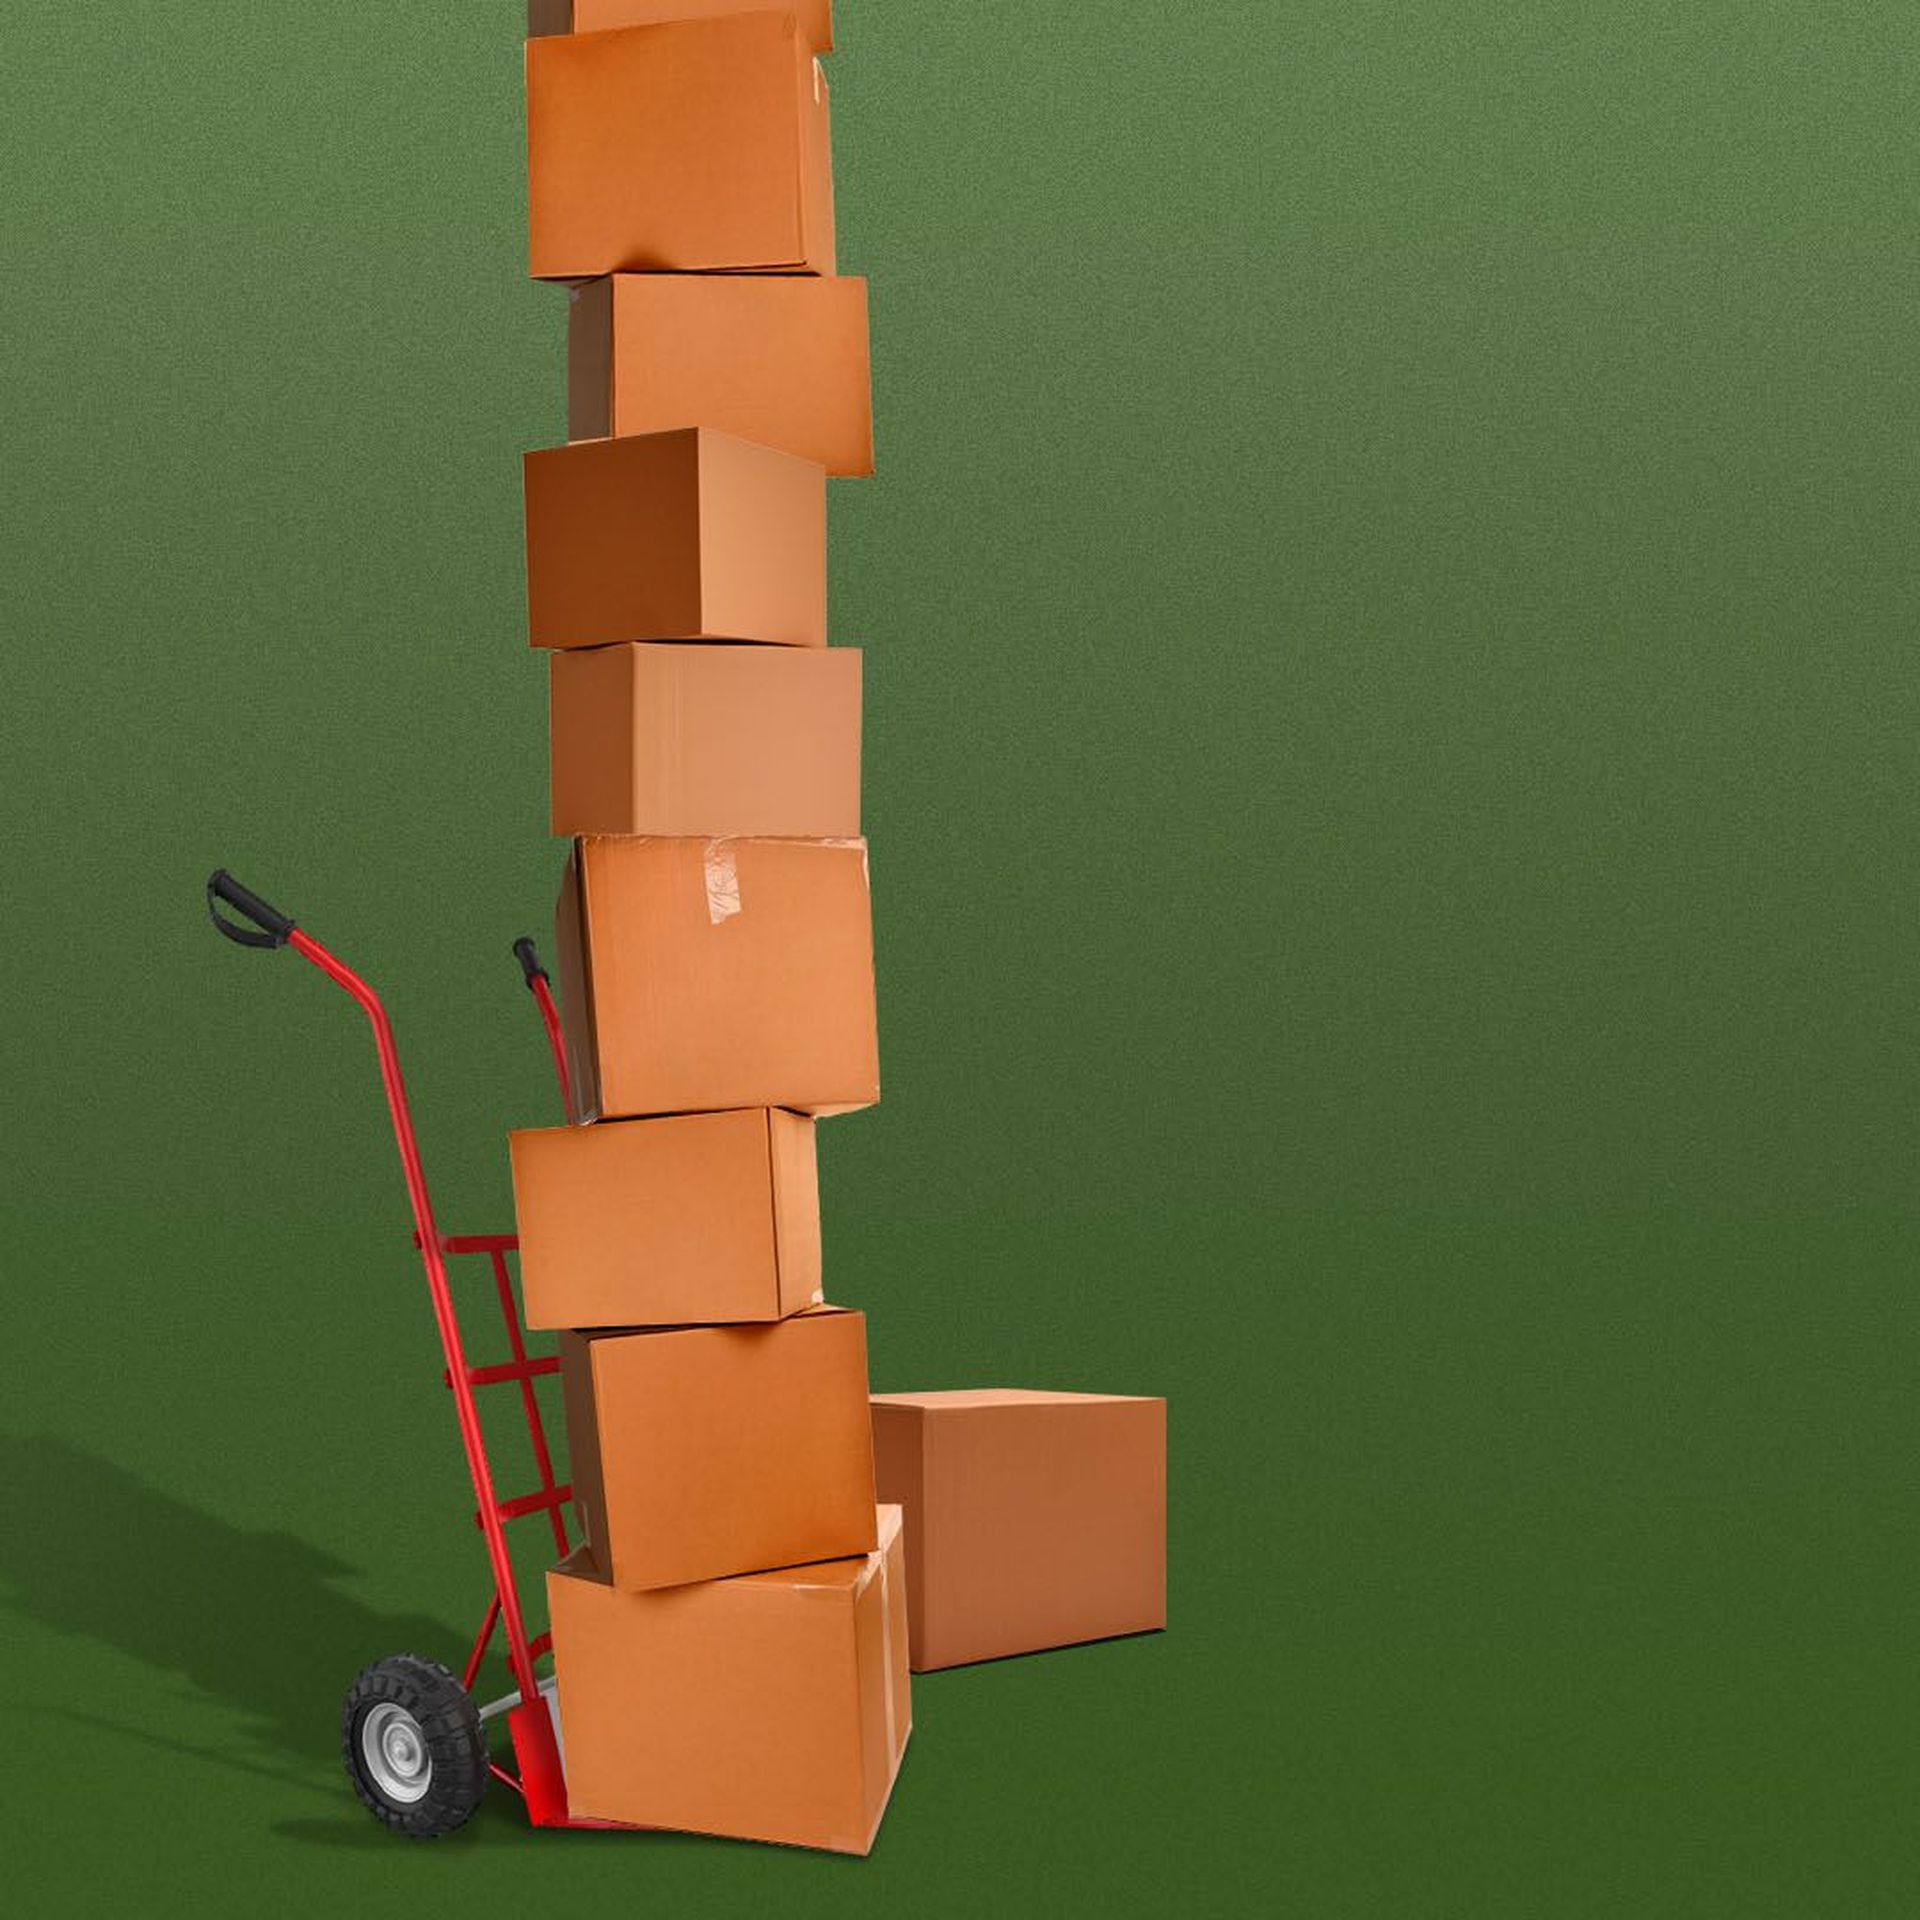 Illustration of a dolly holding a giant stack of delivery boxes